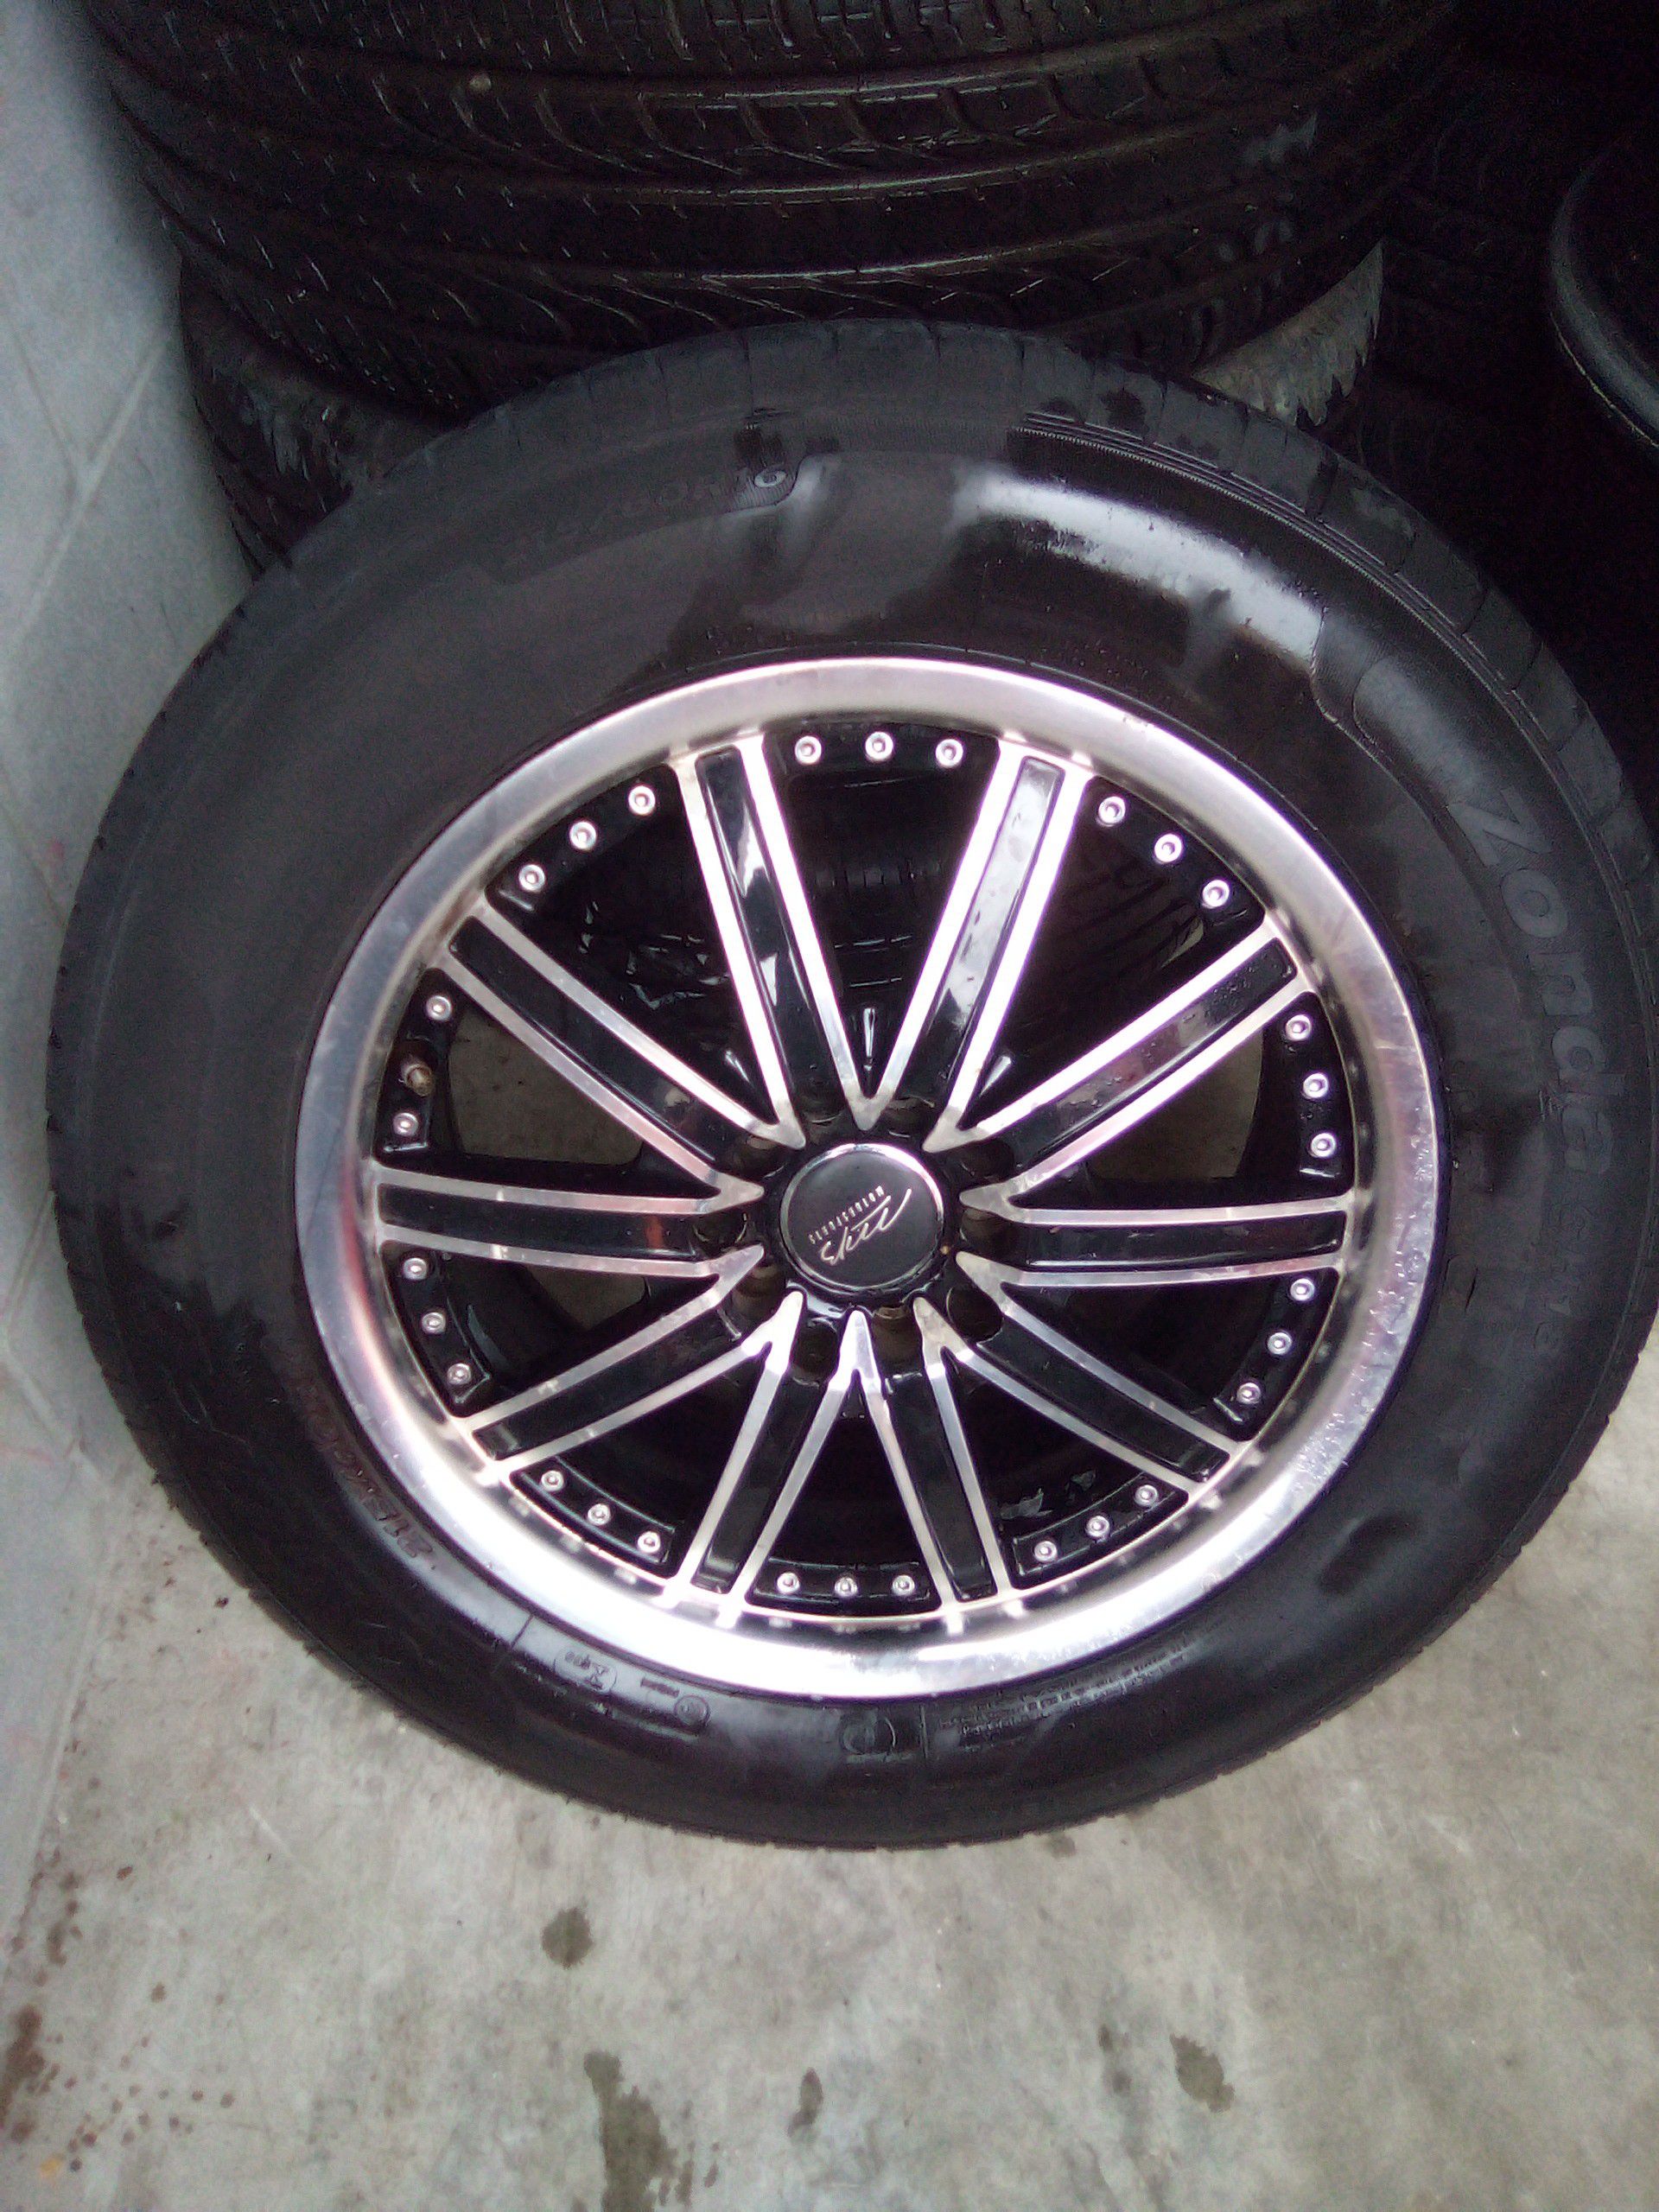 16" tire and rims